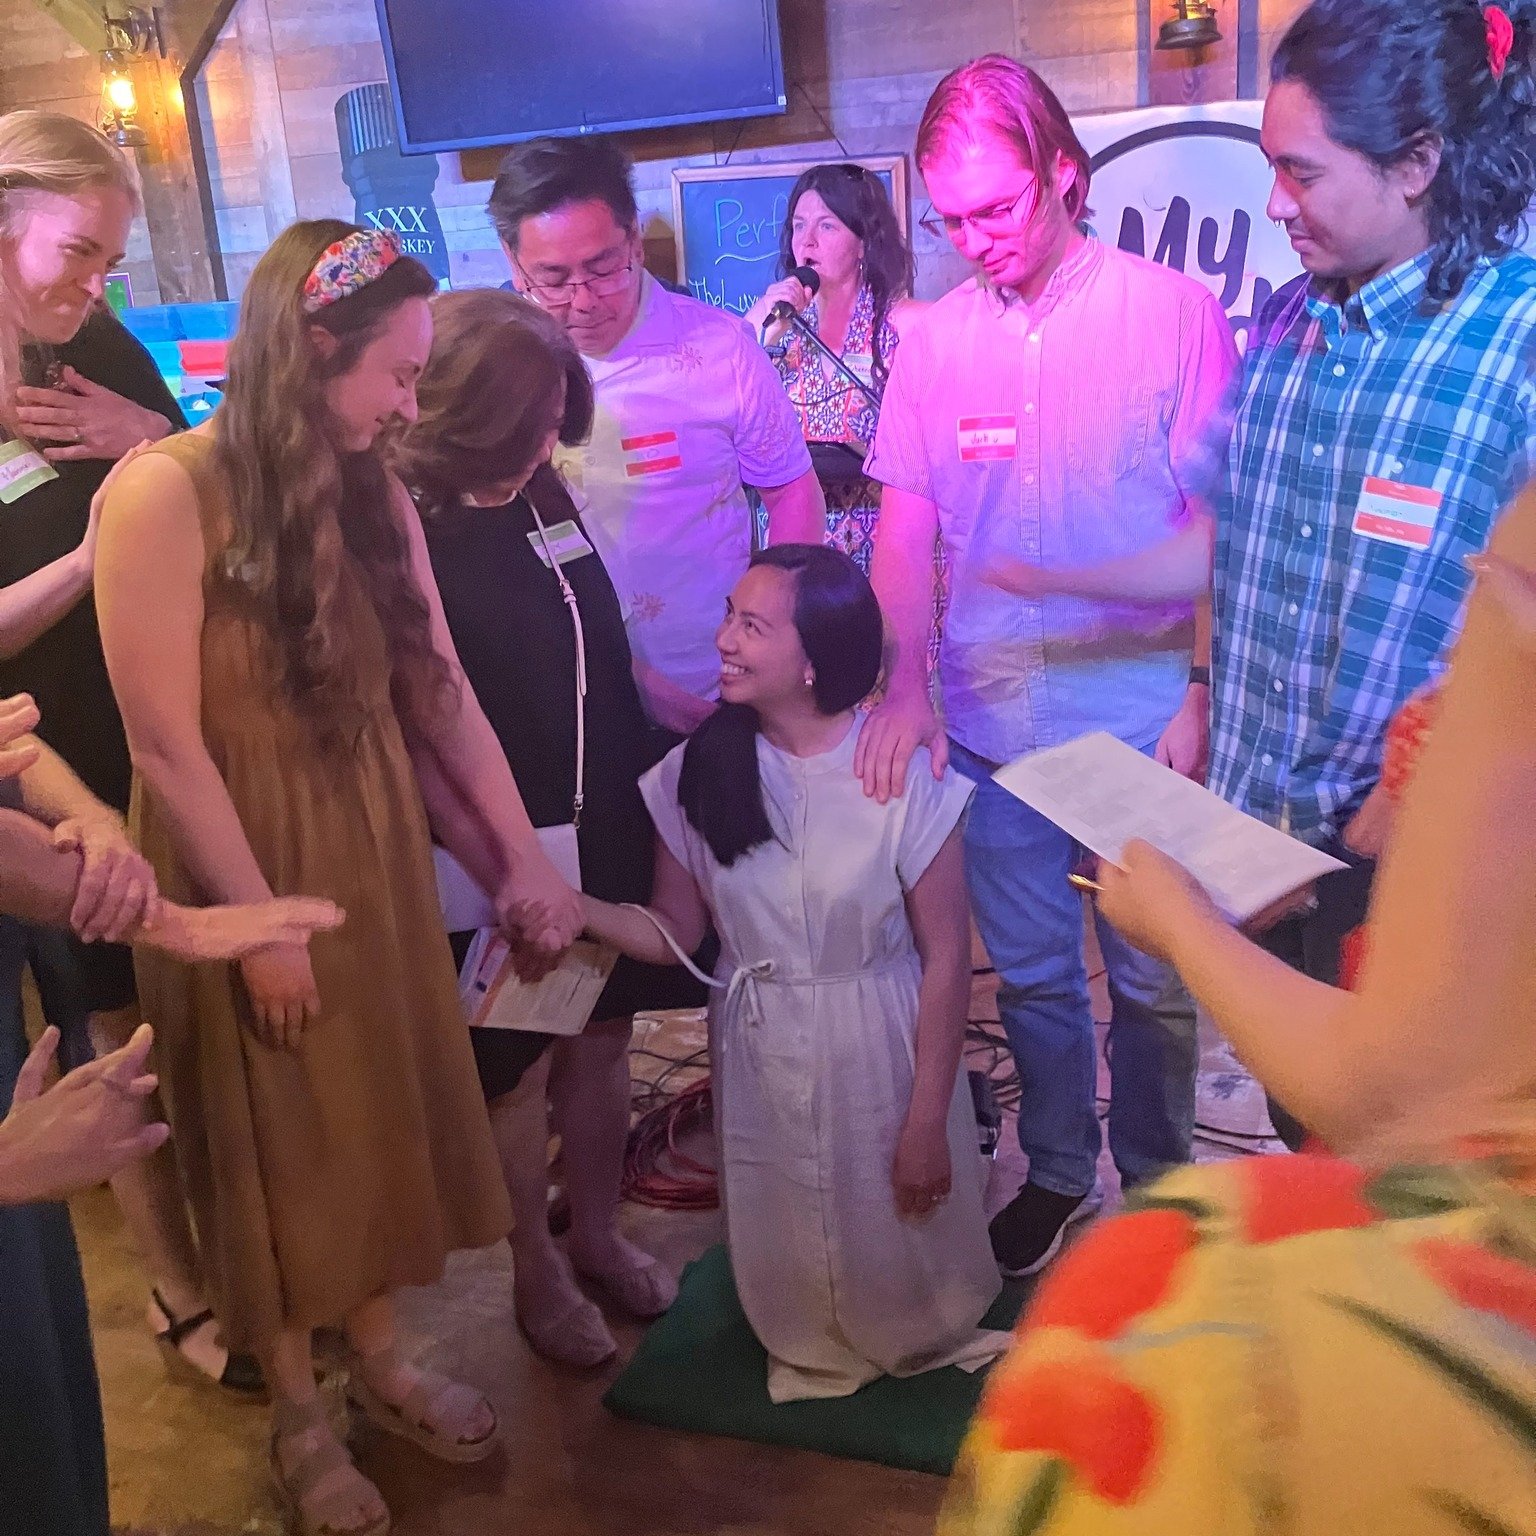 We had the ordination of @alexadavaaa #AboutLastNight ! Gilead has had two ordinations in two years, which is pretty great (and unusual) for such a new church. We hope that the translation of scripture, of care, kindness, and authenticity reverberate